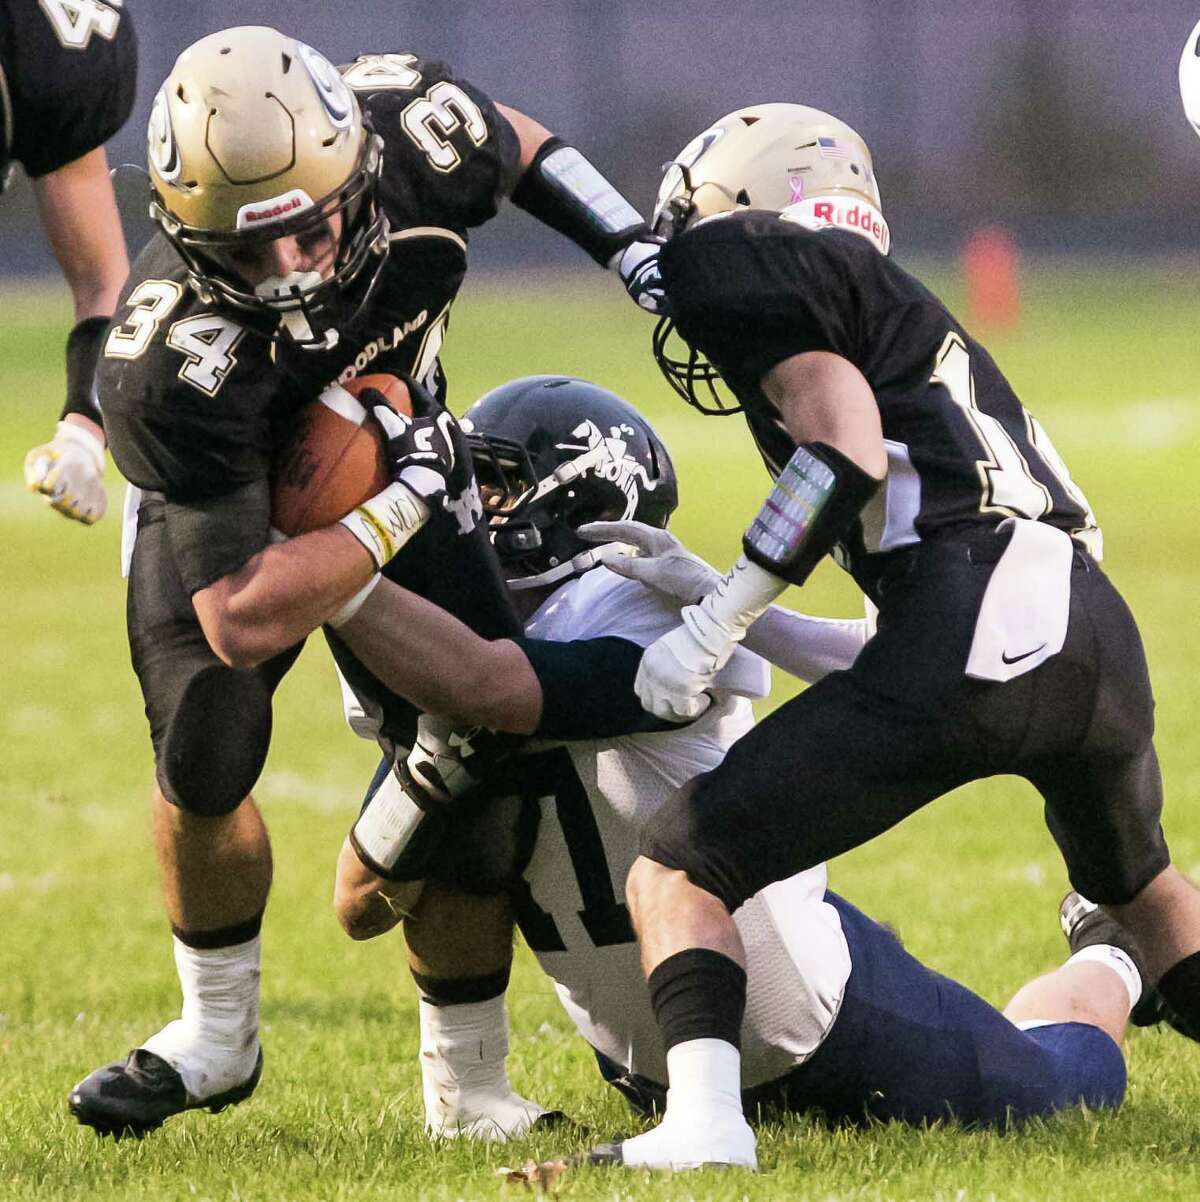 (John Vanacore/For Hearst Connecticut Media) Woodland Hawks hosted the Ansonia Chargers Friday evening in a battle of unbeaten teams Friday evening. Ansonia defeated Woodland 36-20